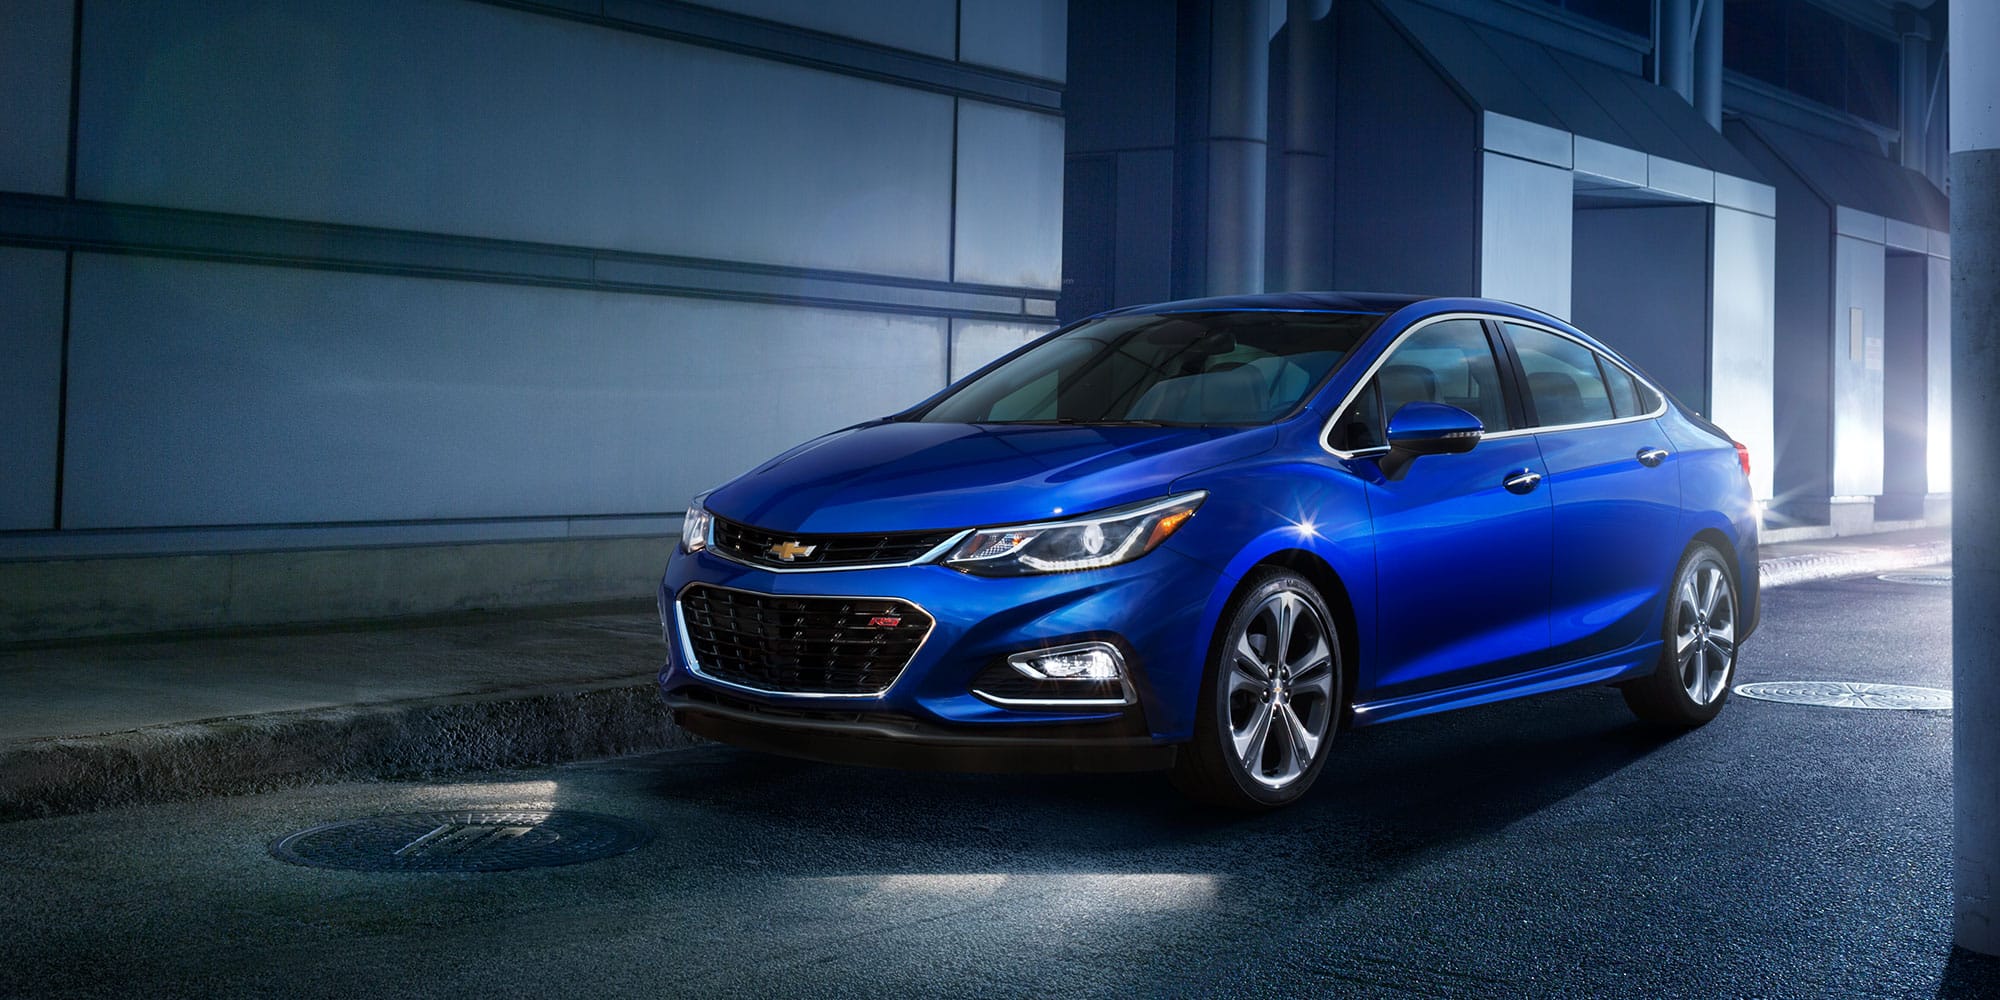 2017 Chevrolet Cruze Airbags, Safety Features, Safety Score